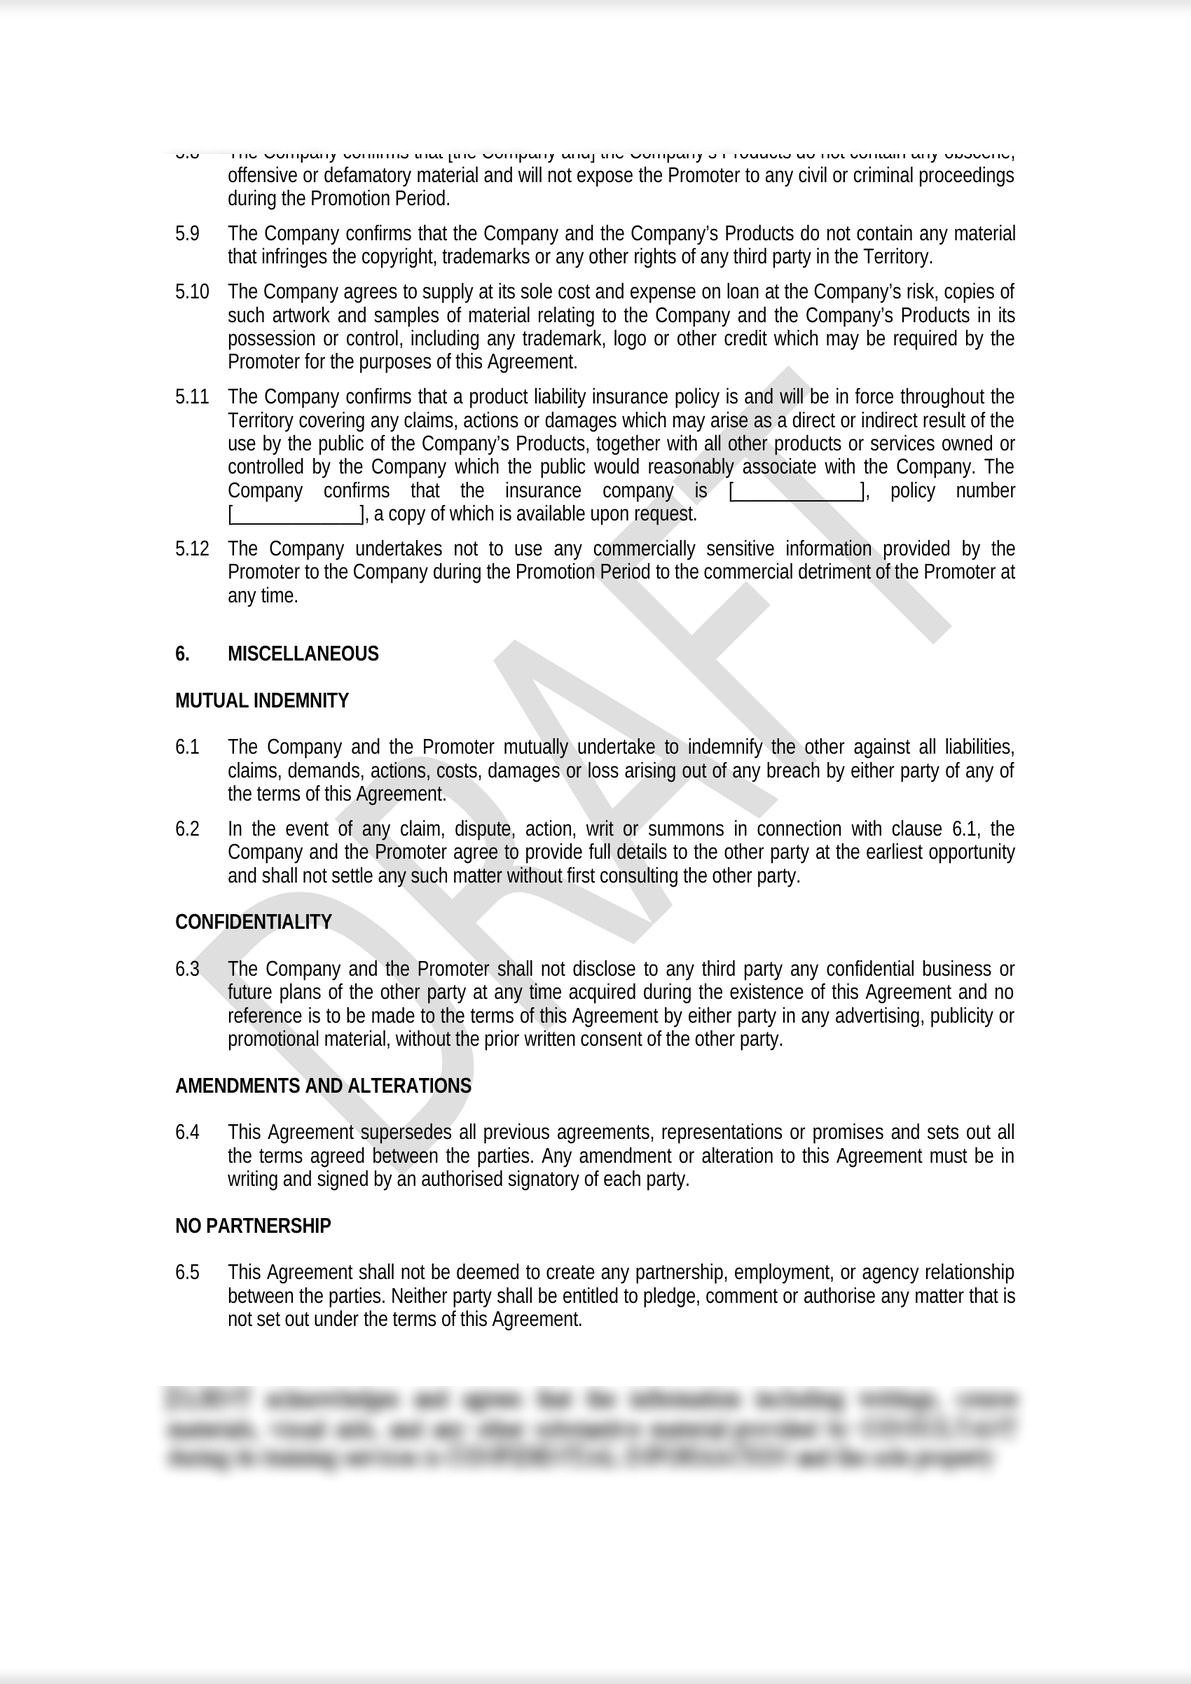 General Advertising & Promotion Agreement (Media Law)-3